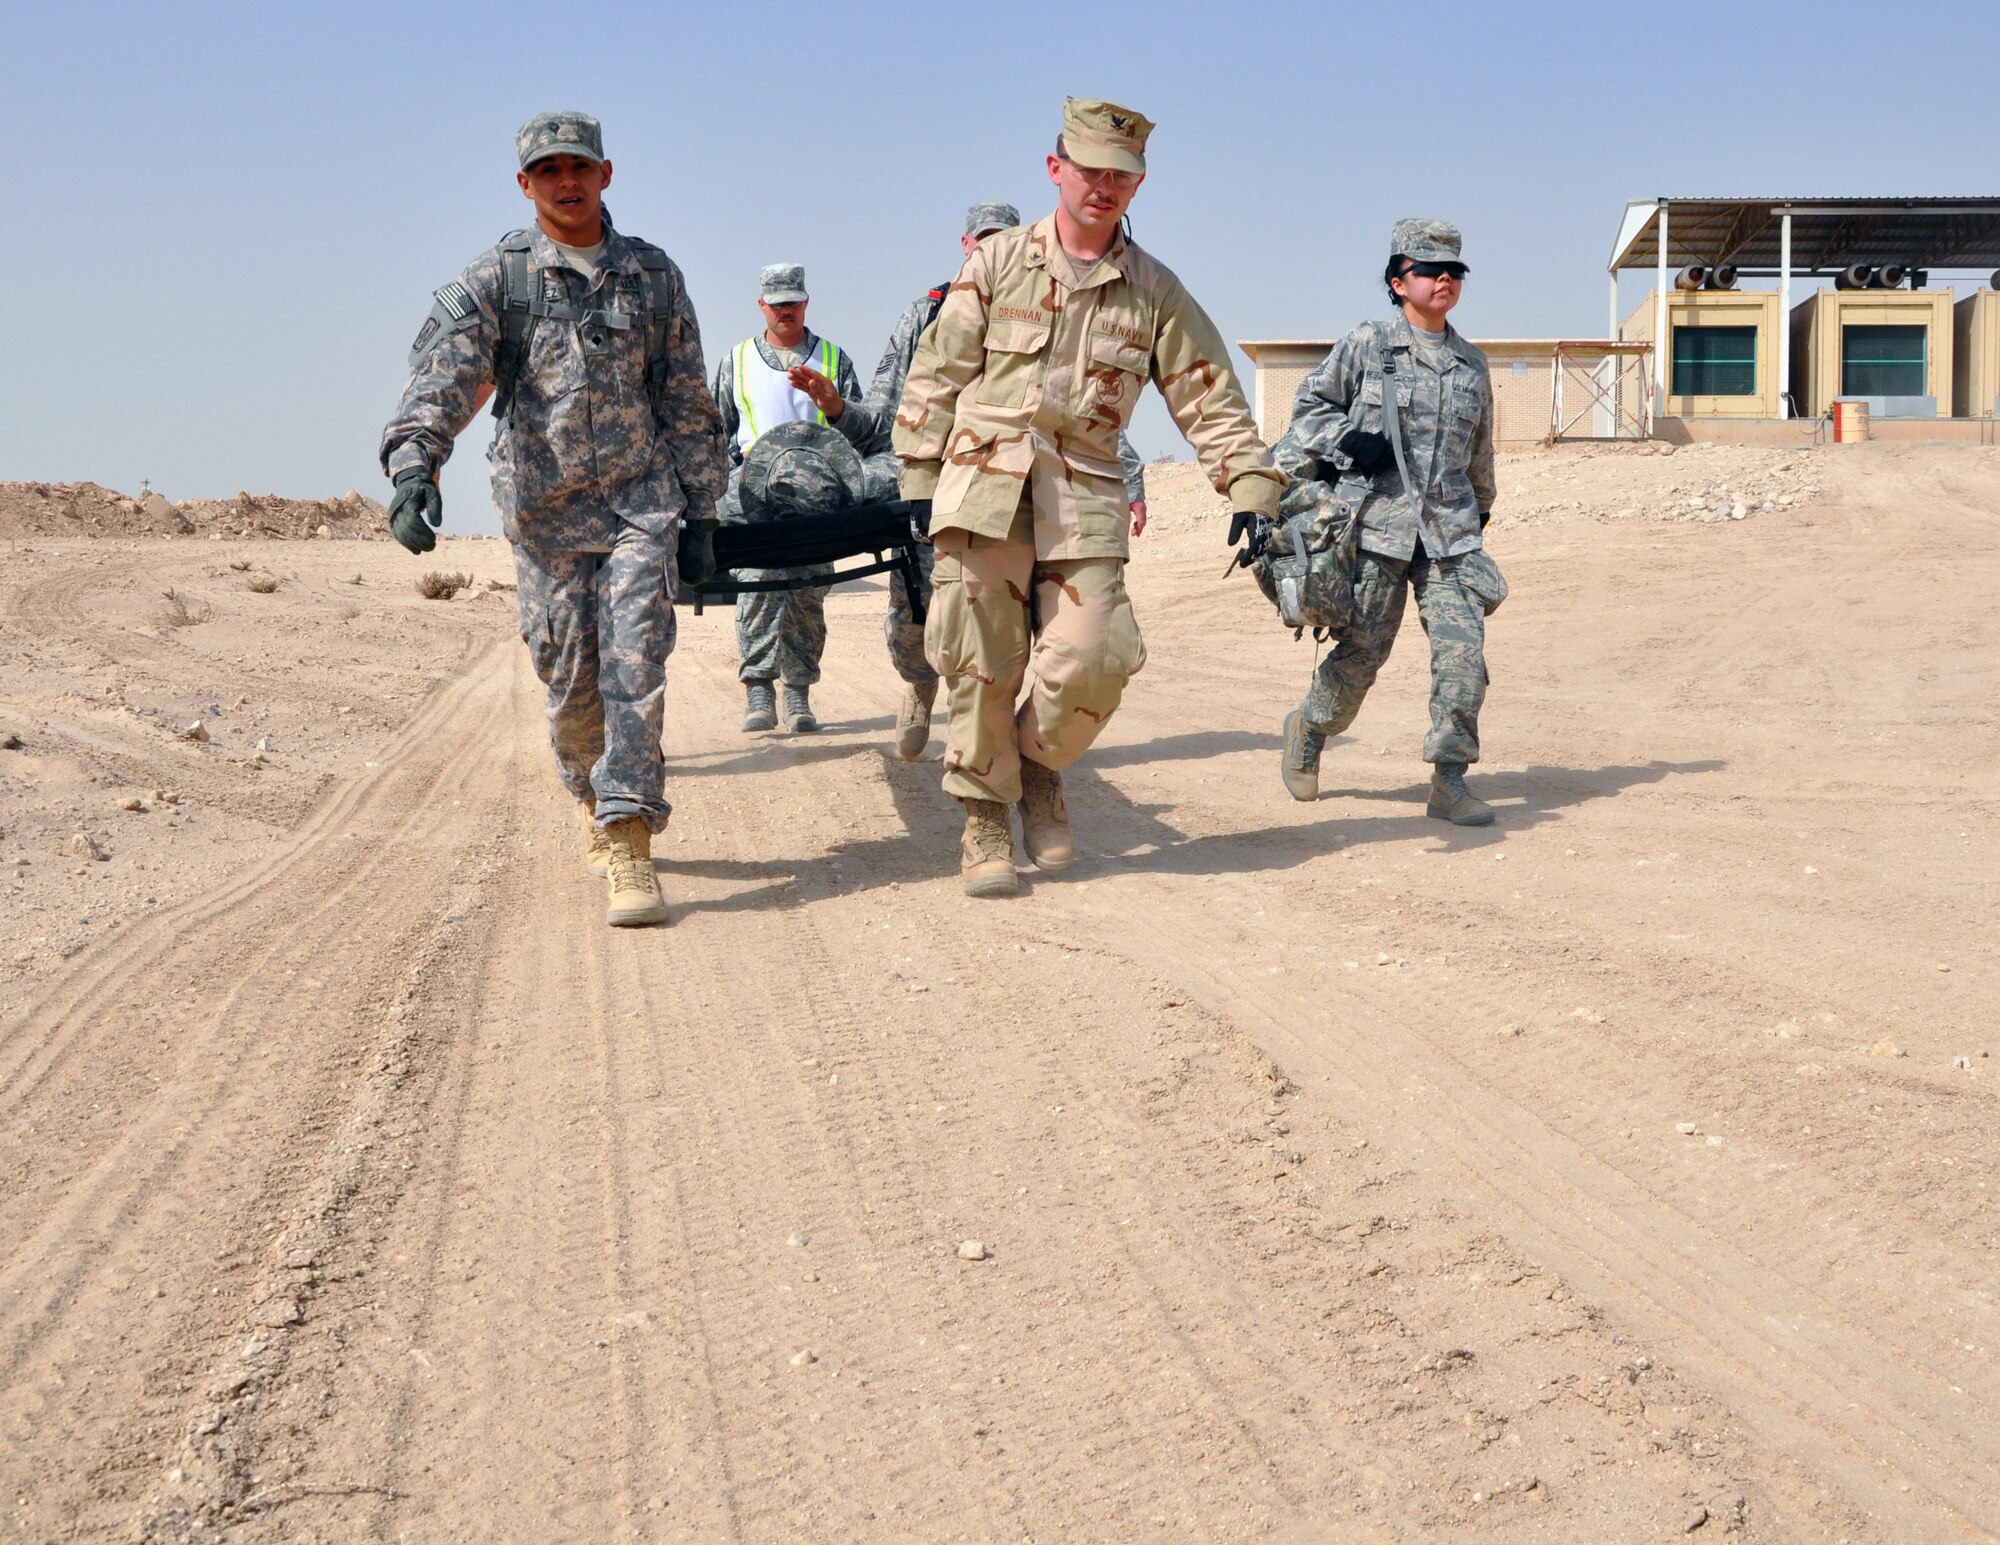 U.S. Air Force, Army and Navy medics and firefighters carry a litter with a simulated patient as part of an EMT Rodeo hosted by the 386th Expeditionary Medical Group in an undisclosed location, Southwest Asia, Feb. 18, 2012.  These emergency medical technicians participated in the competition to test their skills and knowledge in responding to different emergency situations alongside military and civilian EMT personnel from the Air Force, Army, and Navy. (U.S. Air Force photo/Tech. Sgt. Stacy Fowler)